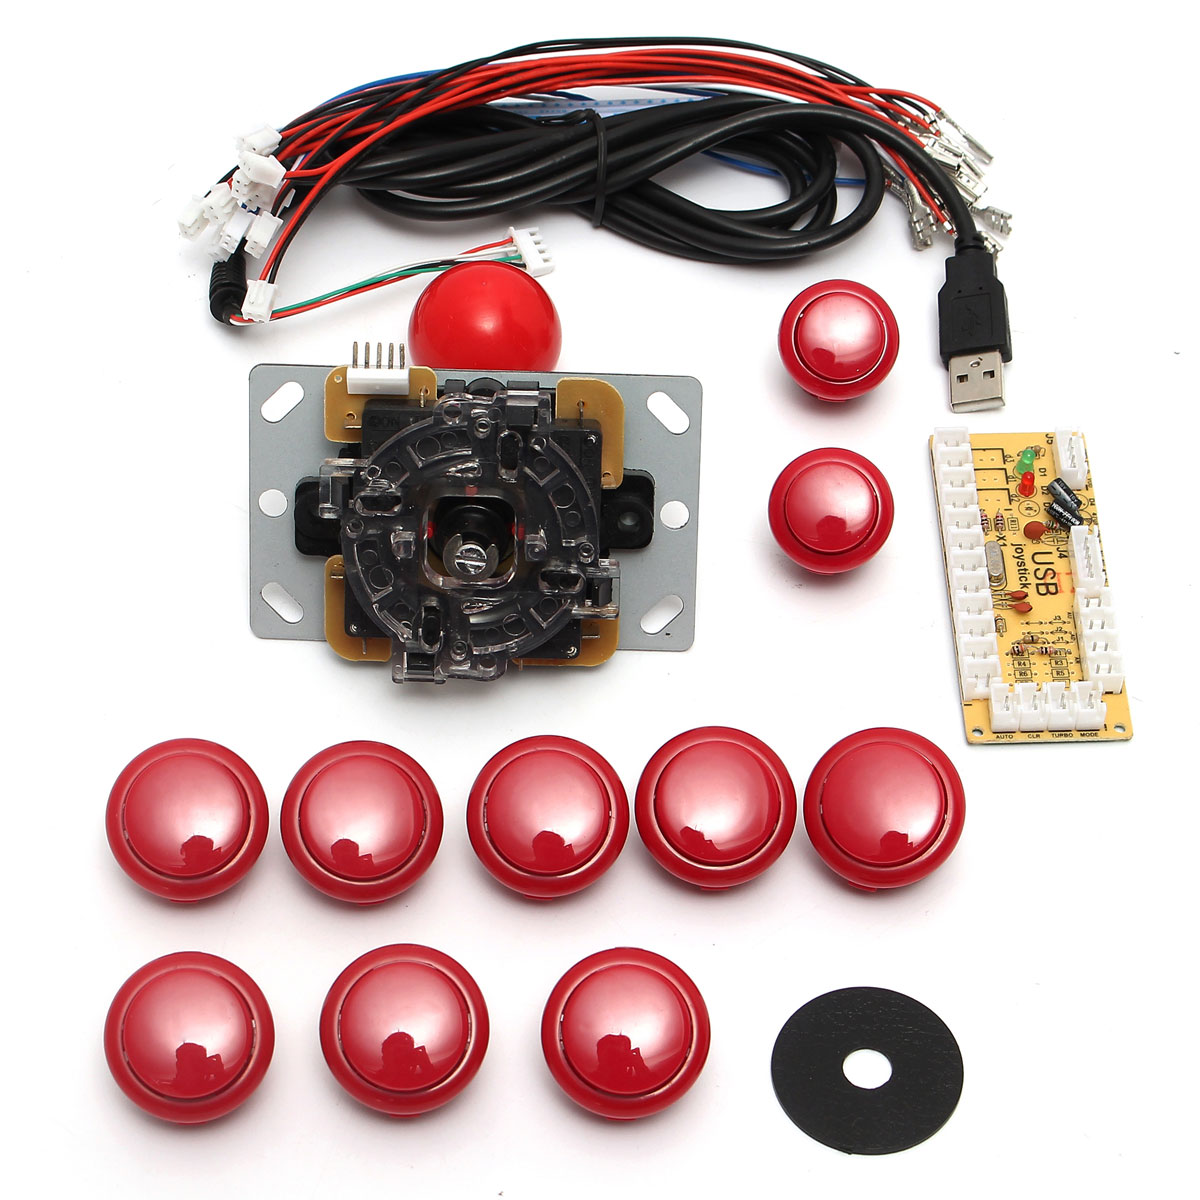 

Dual Players Red Game DIY Arcade Game Console Set Kits Replacement Parts USB Encoders to PC Double Joysticks and Buttons